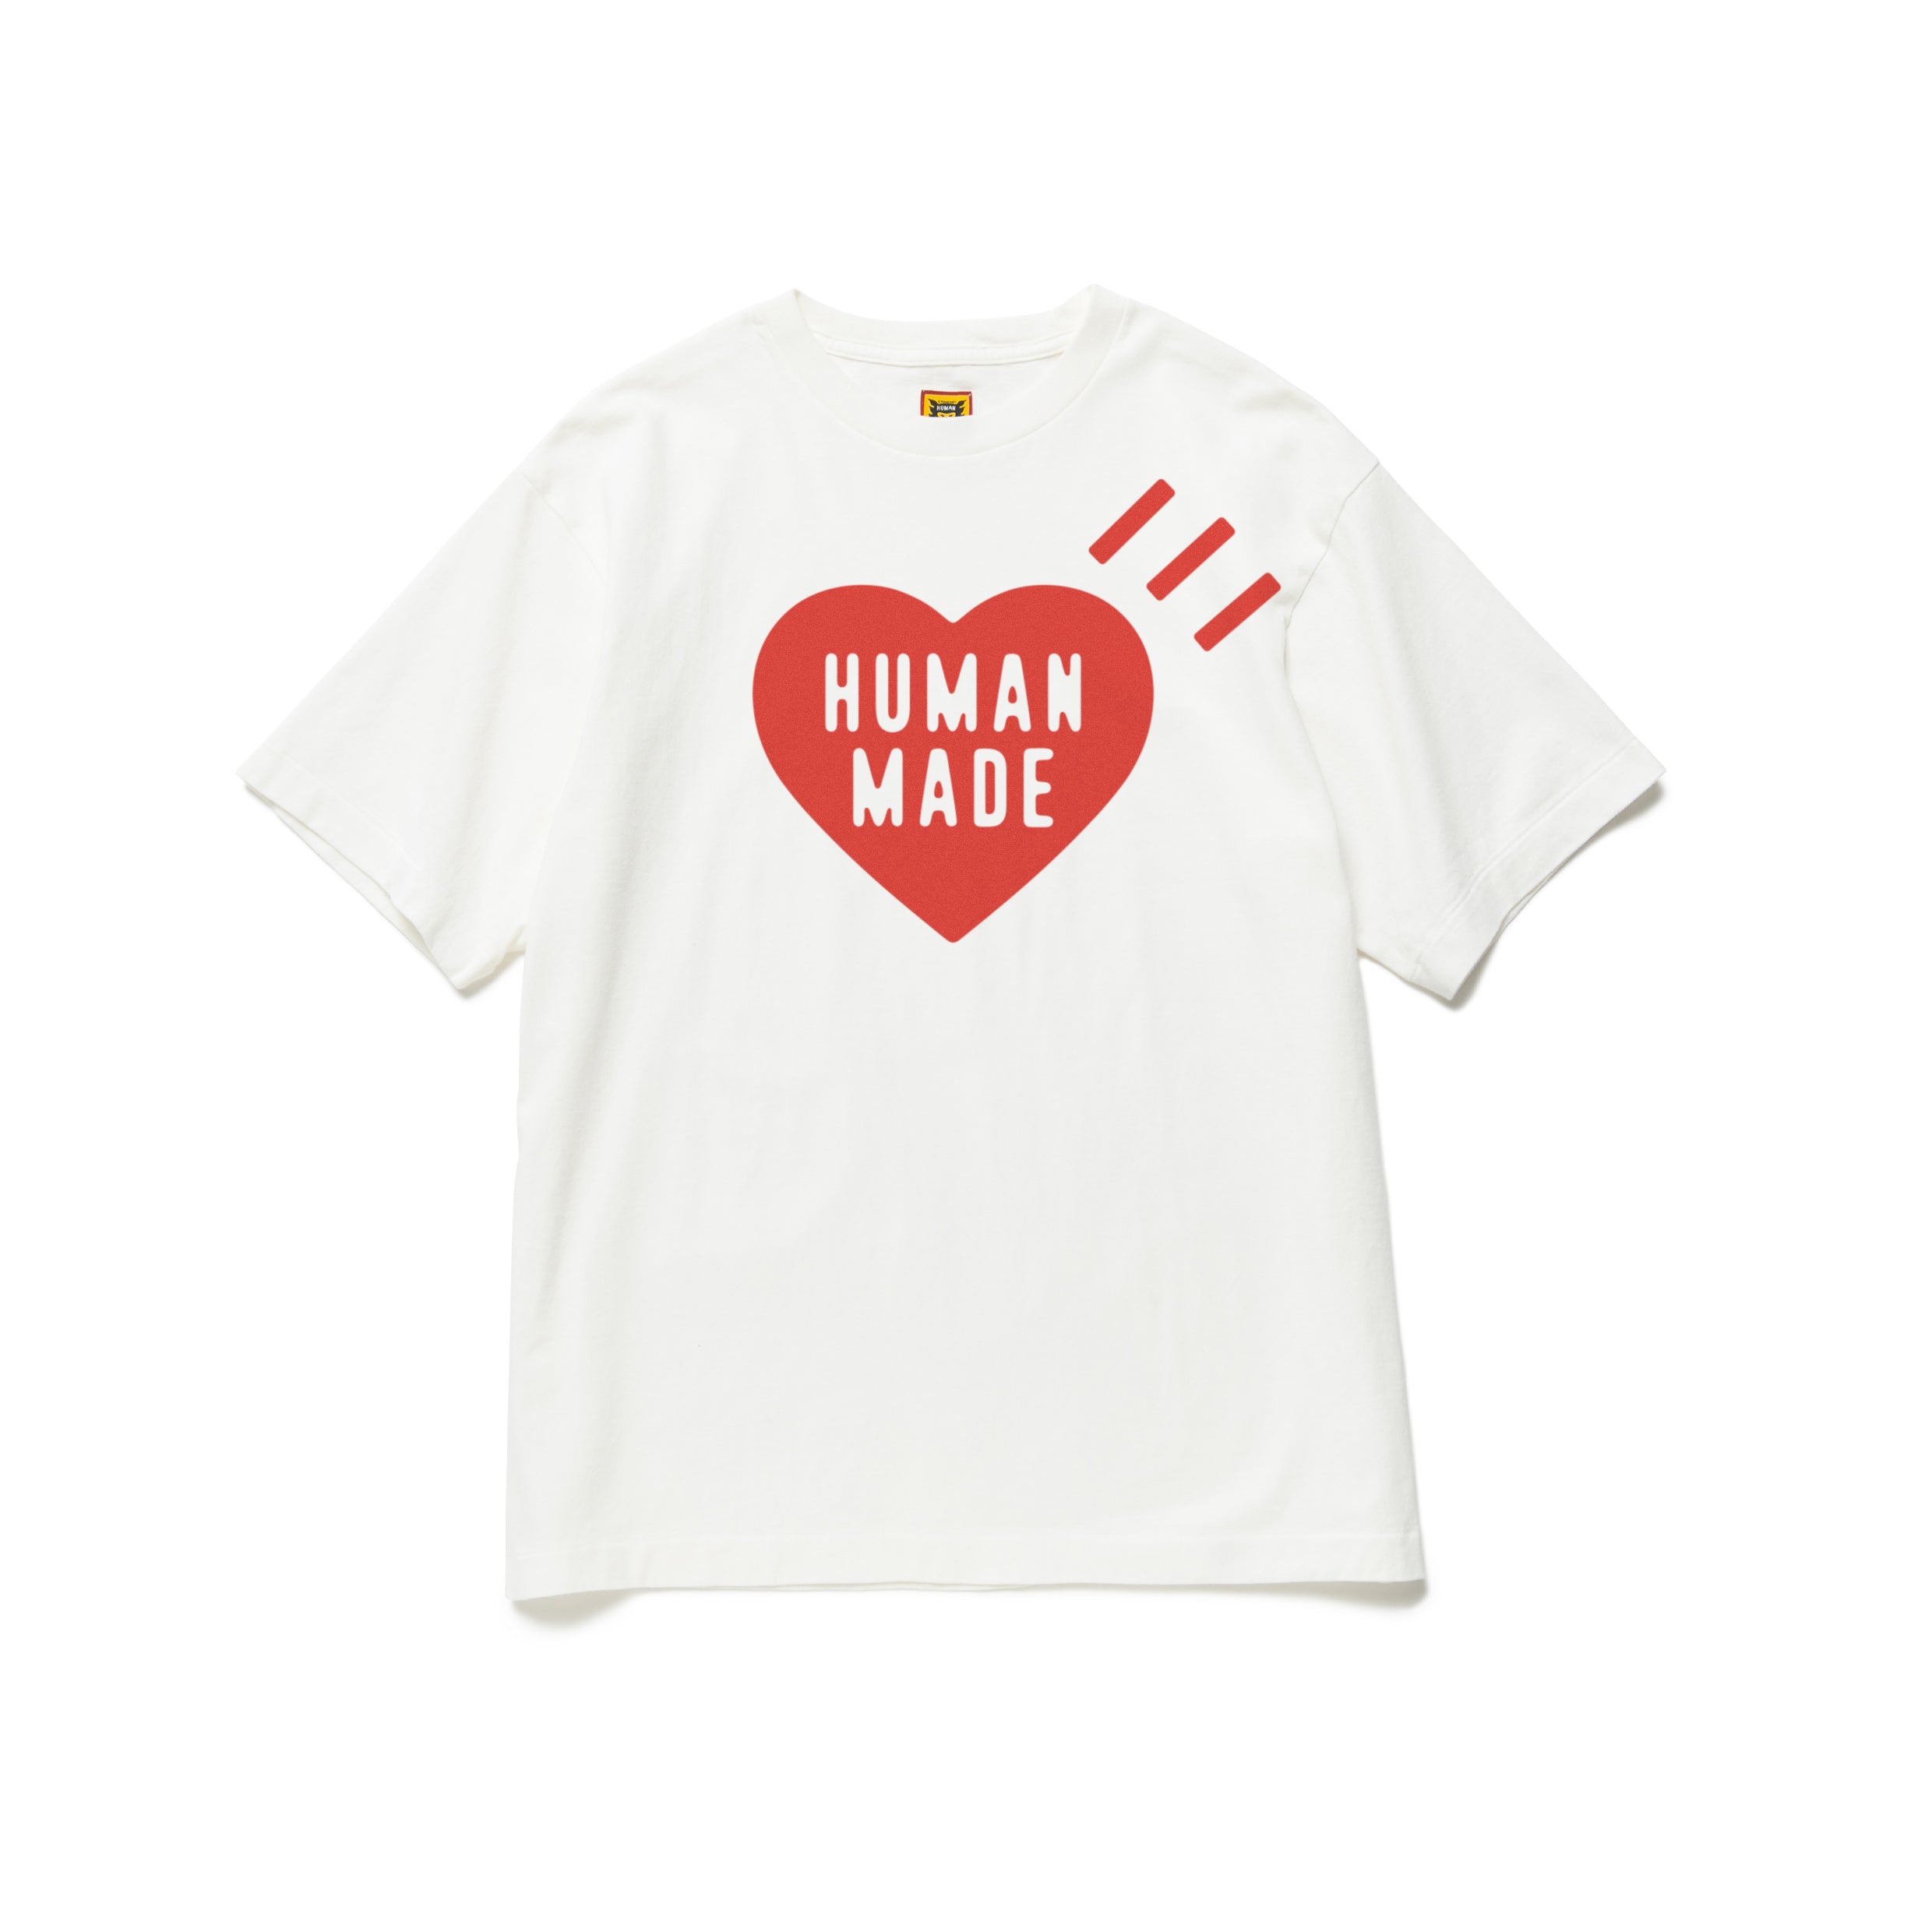 DAILY S/S T-SHIRT #261117 – HUMAN MADE ONLINE STORE